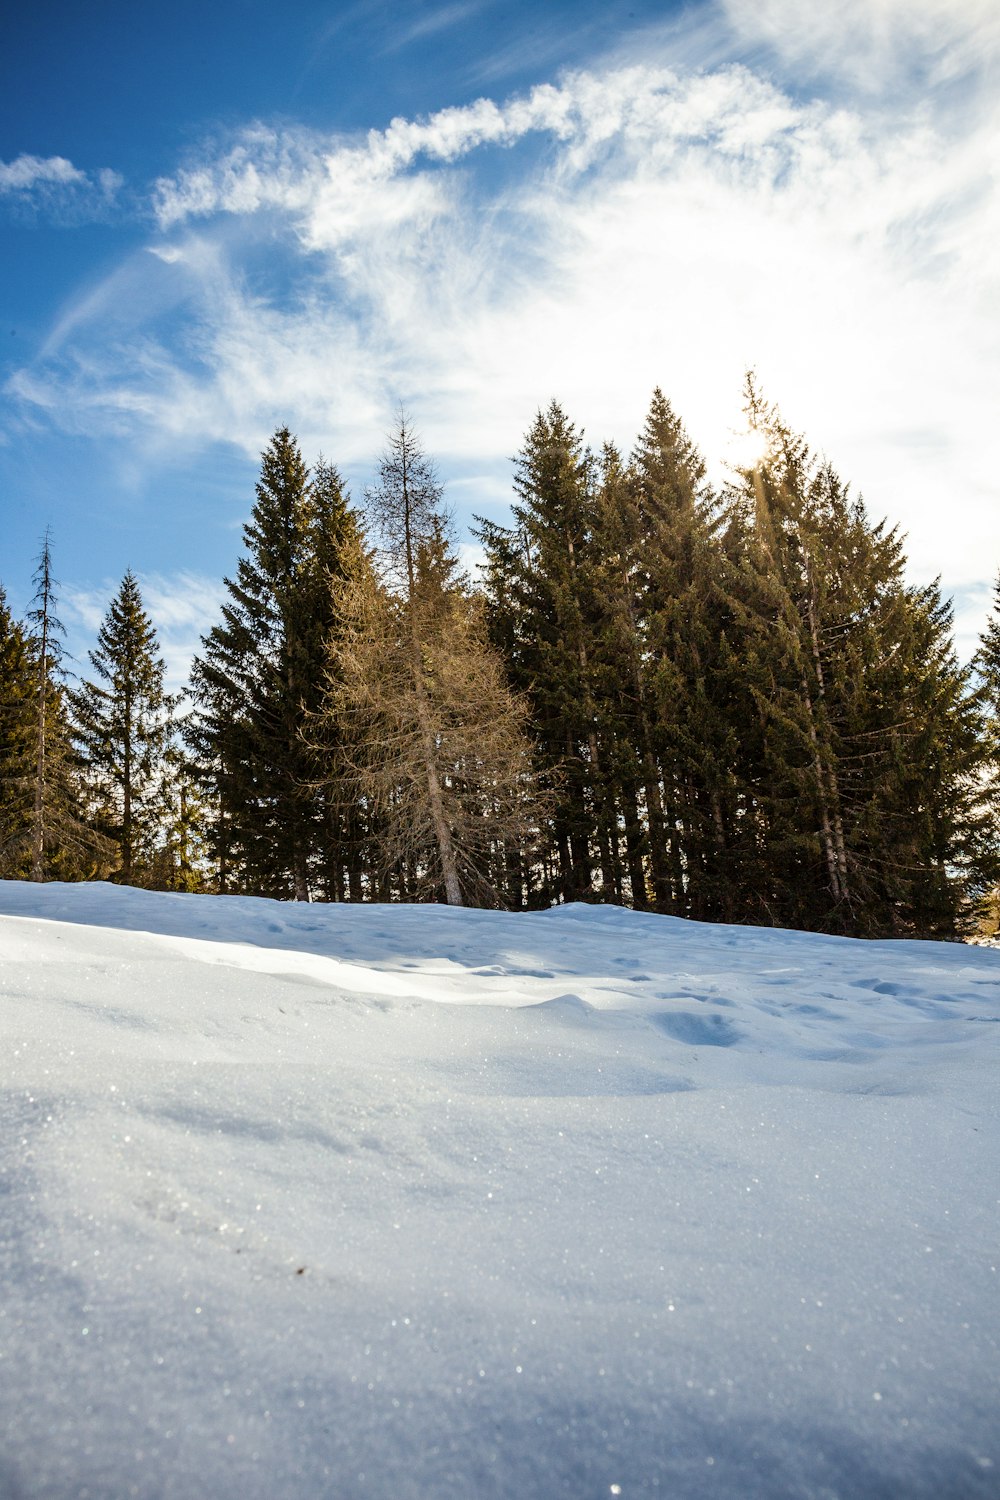 green pine trees on snow covered ground under blue sky during daytime